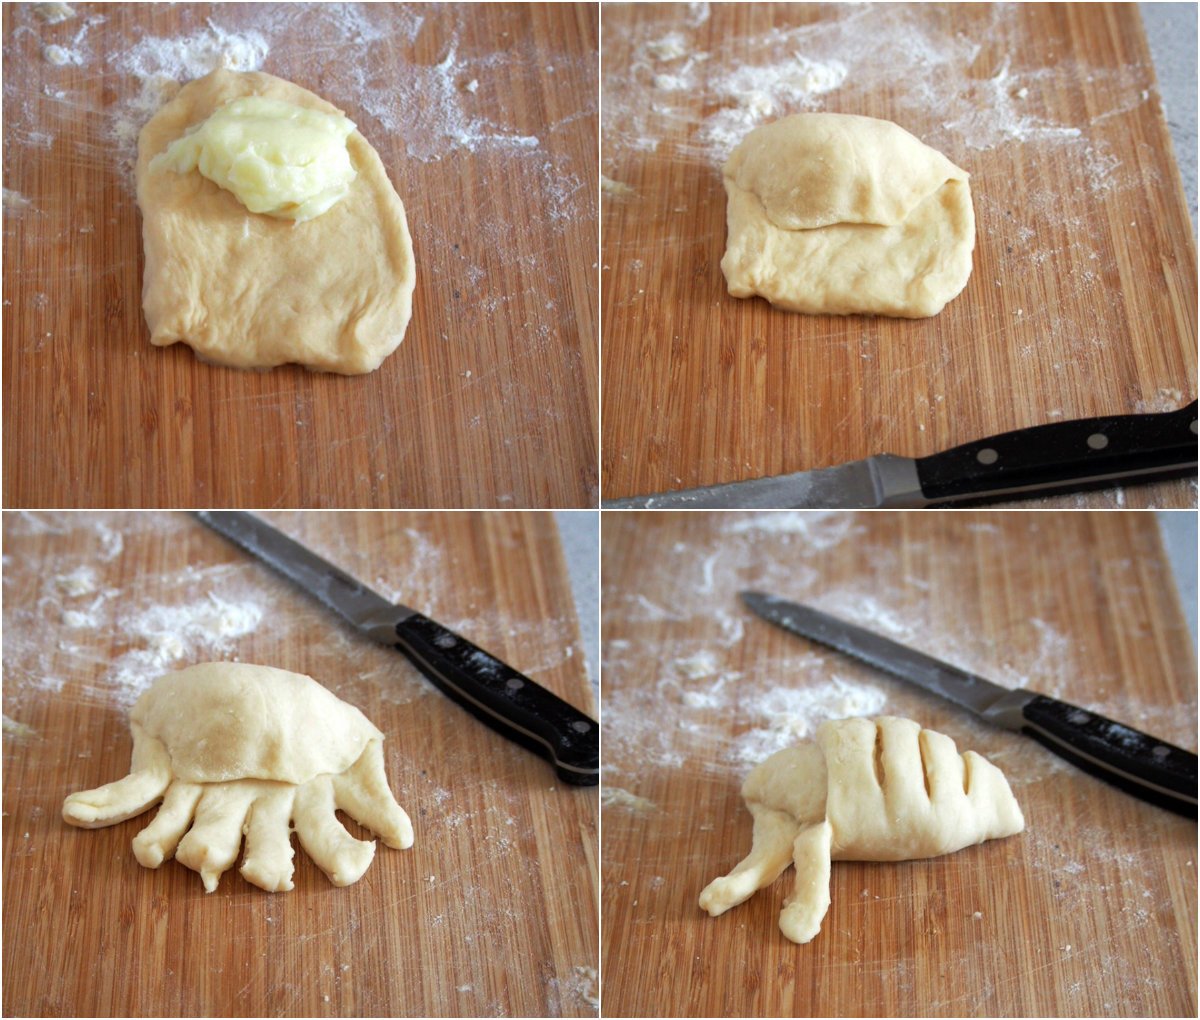 Collage showing how to form the pan de leche buns.